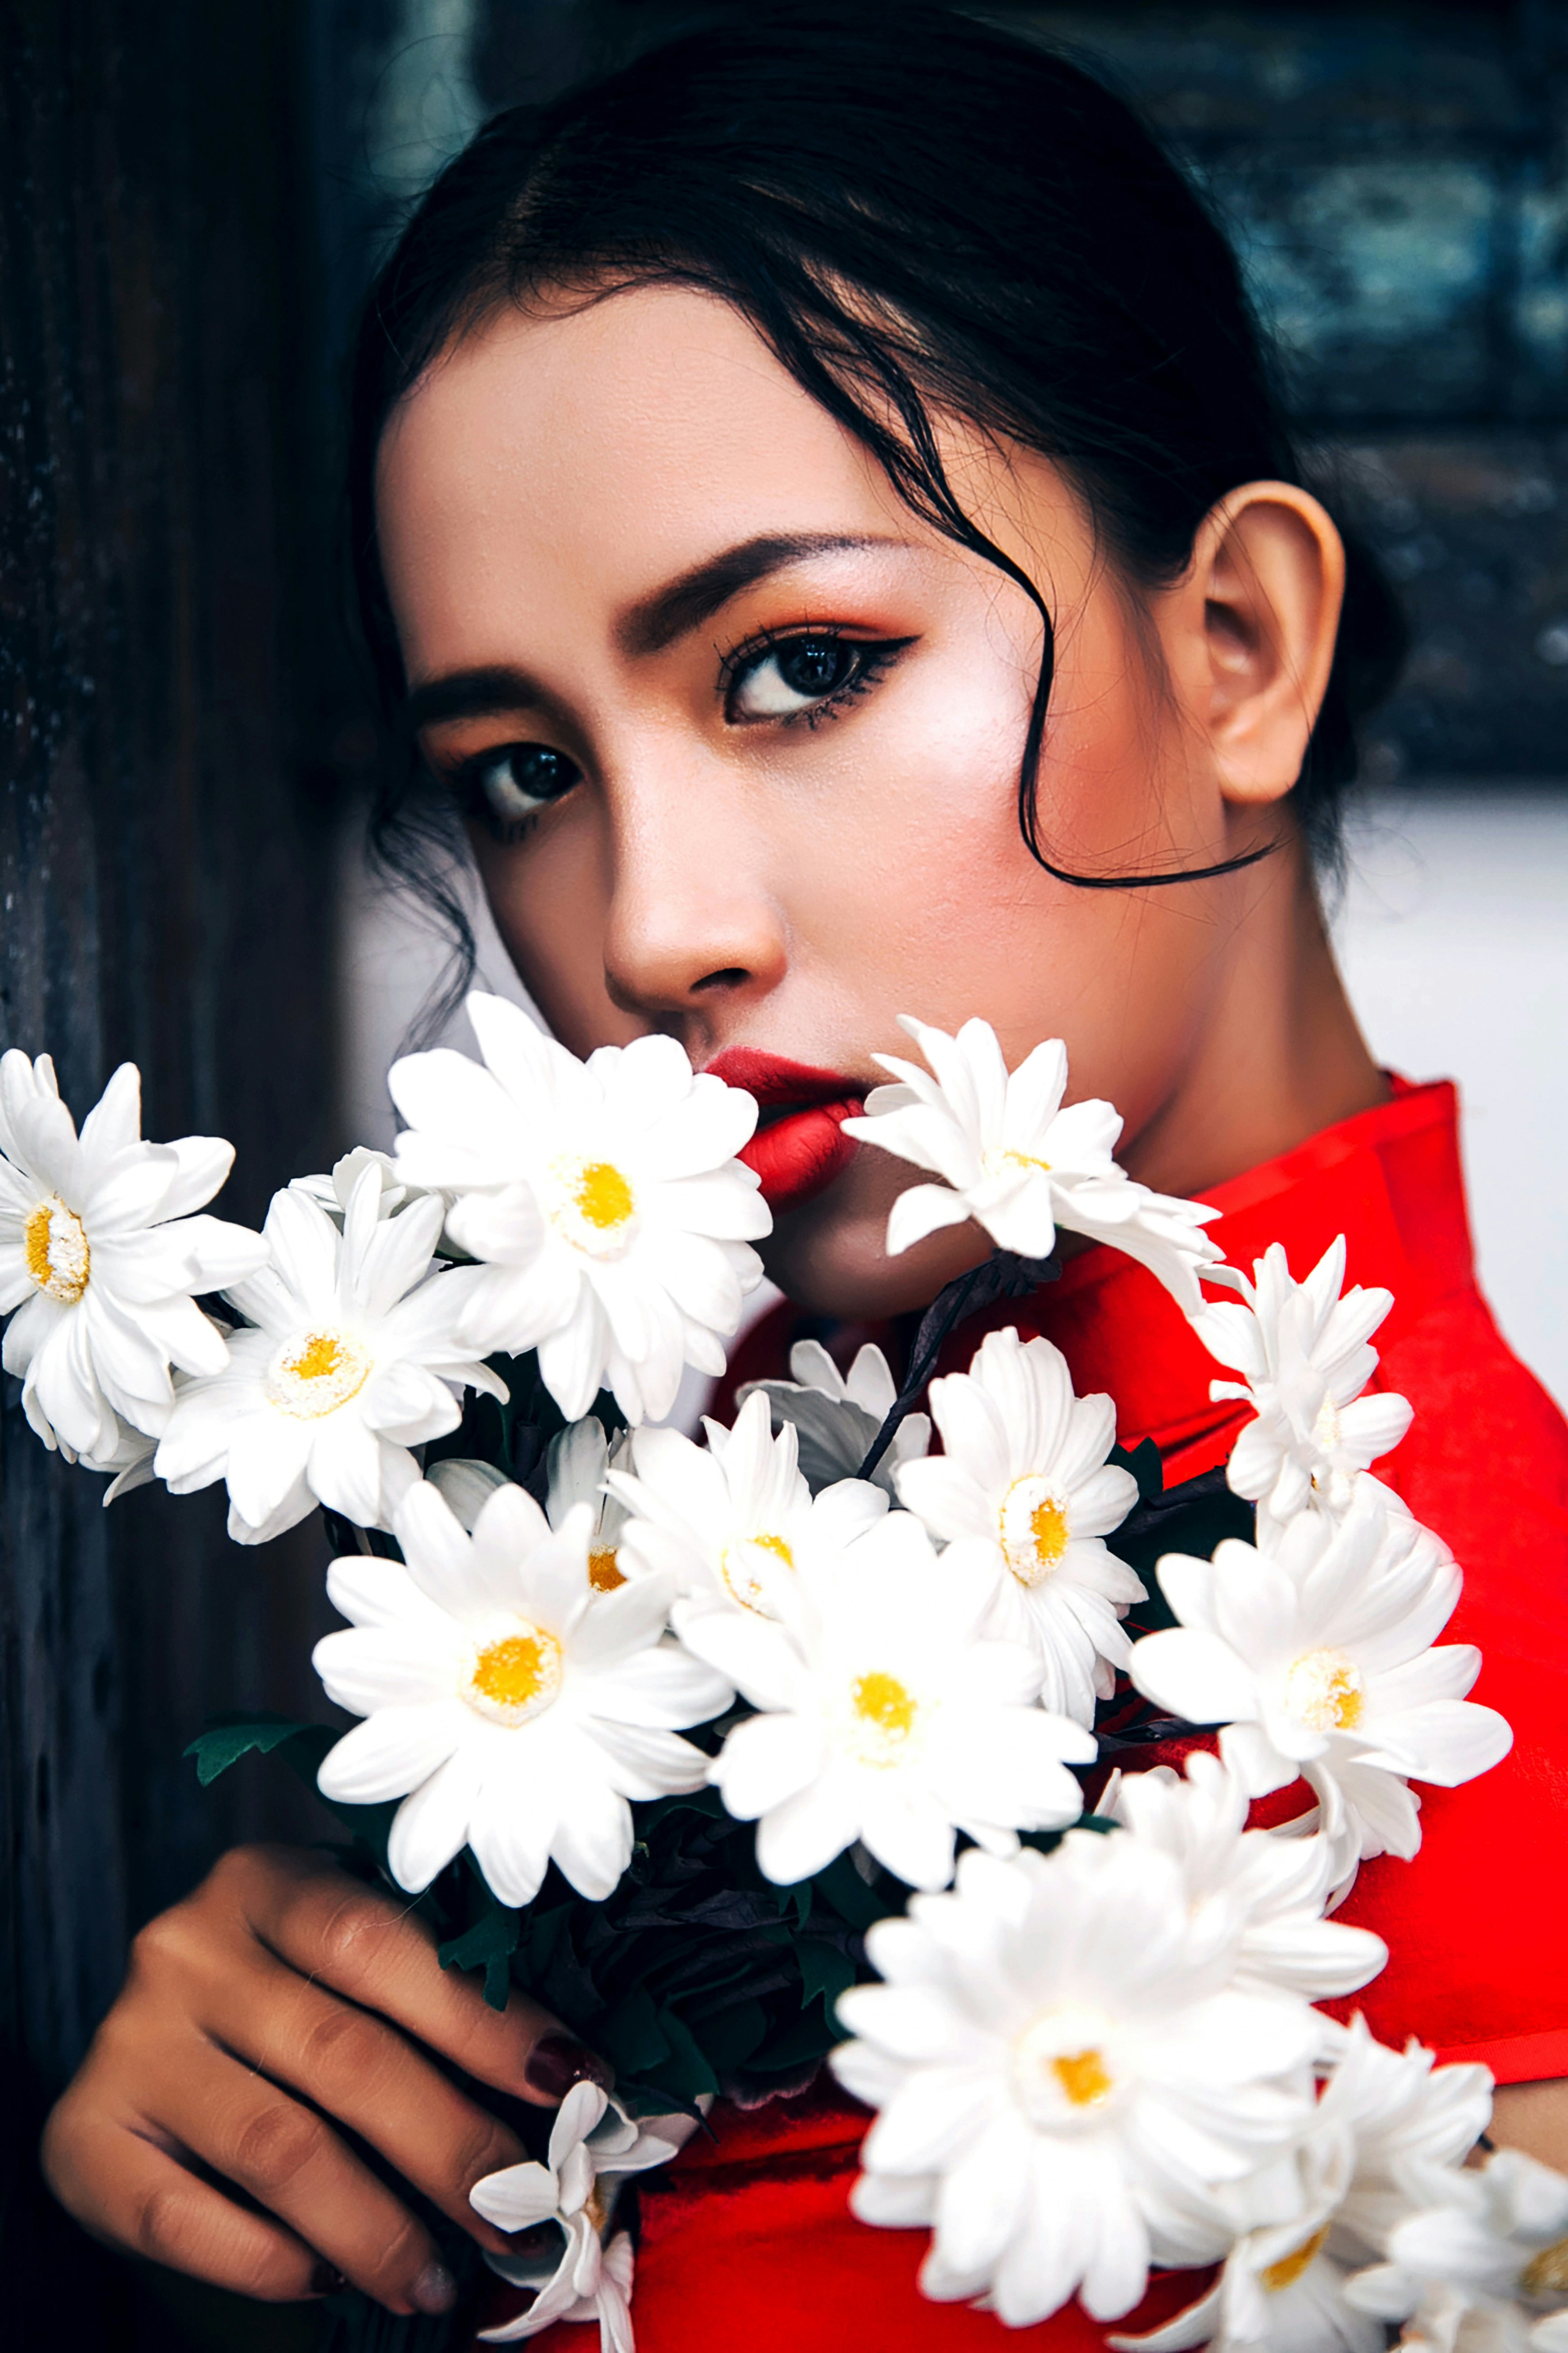 woman in red shirt holding white daisy flowers